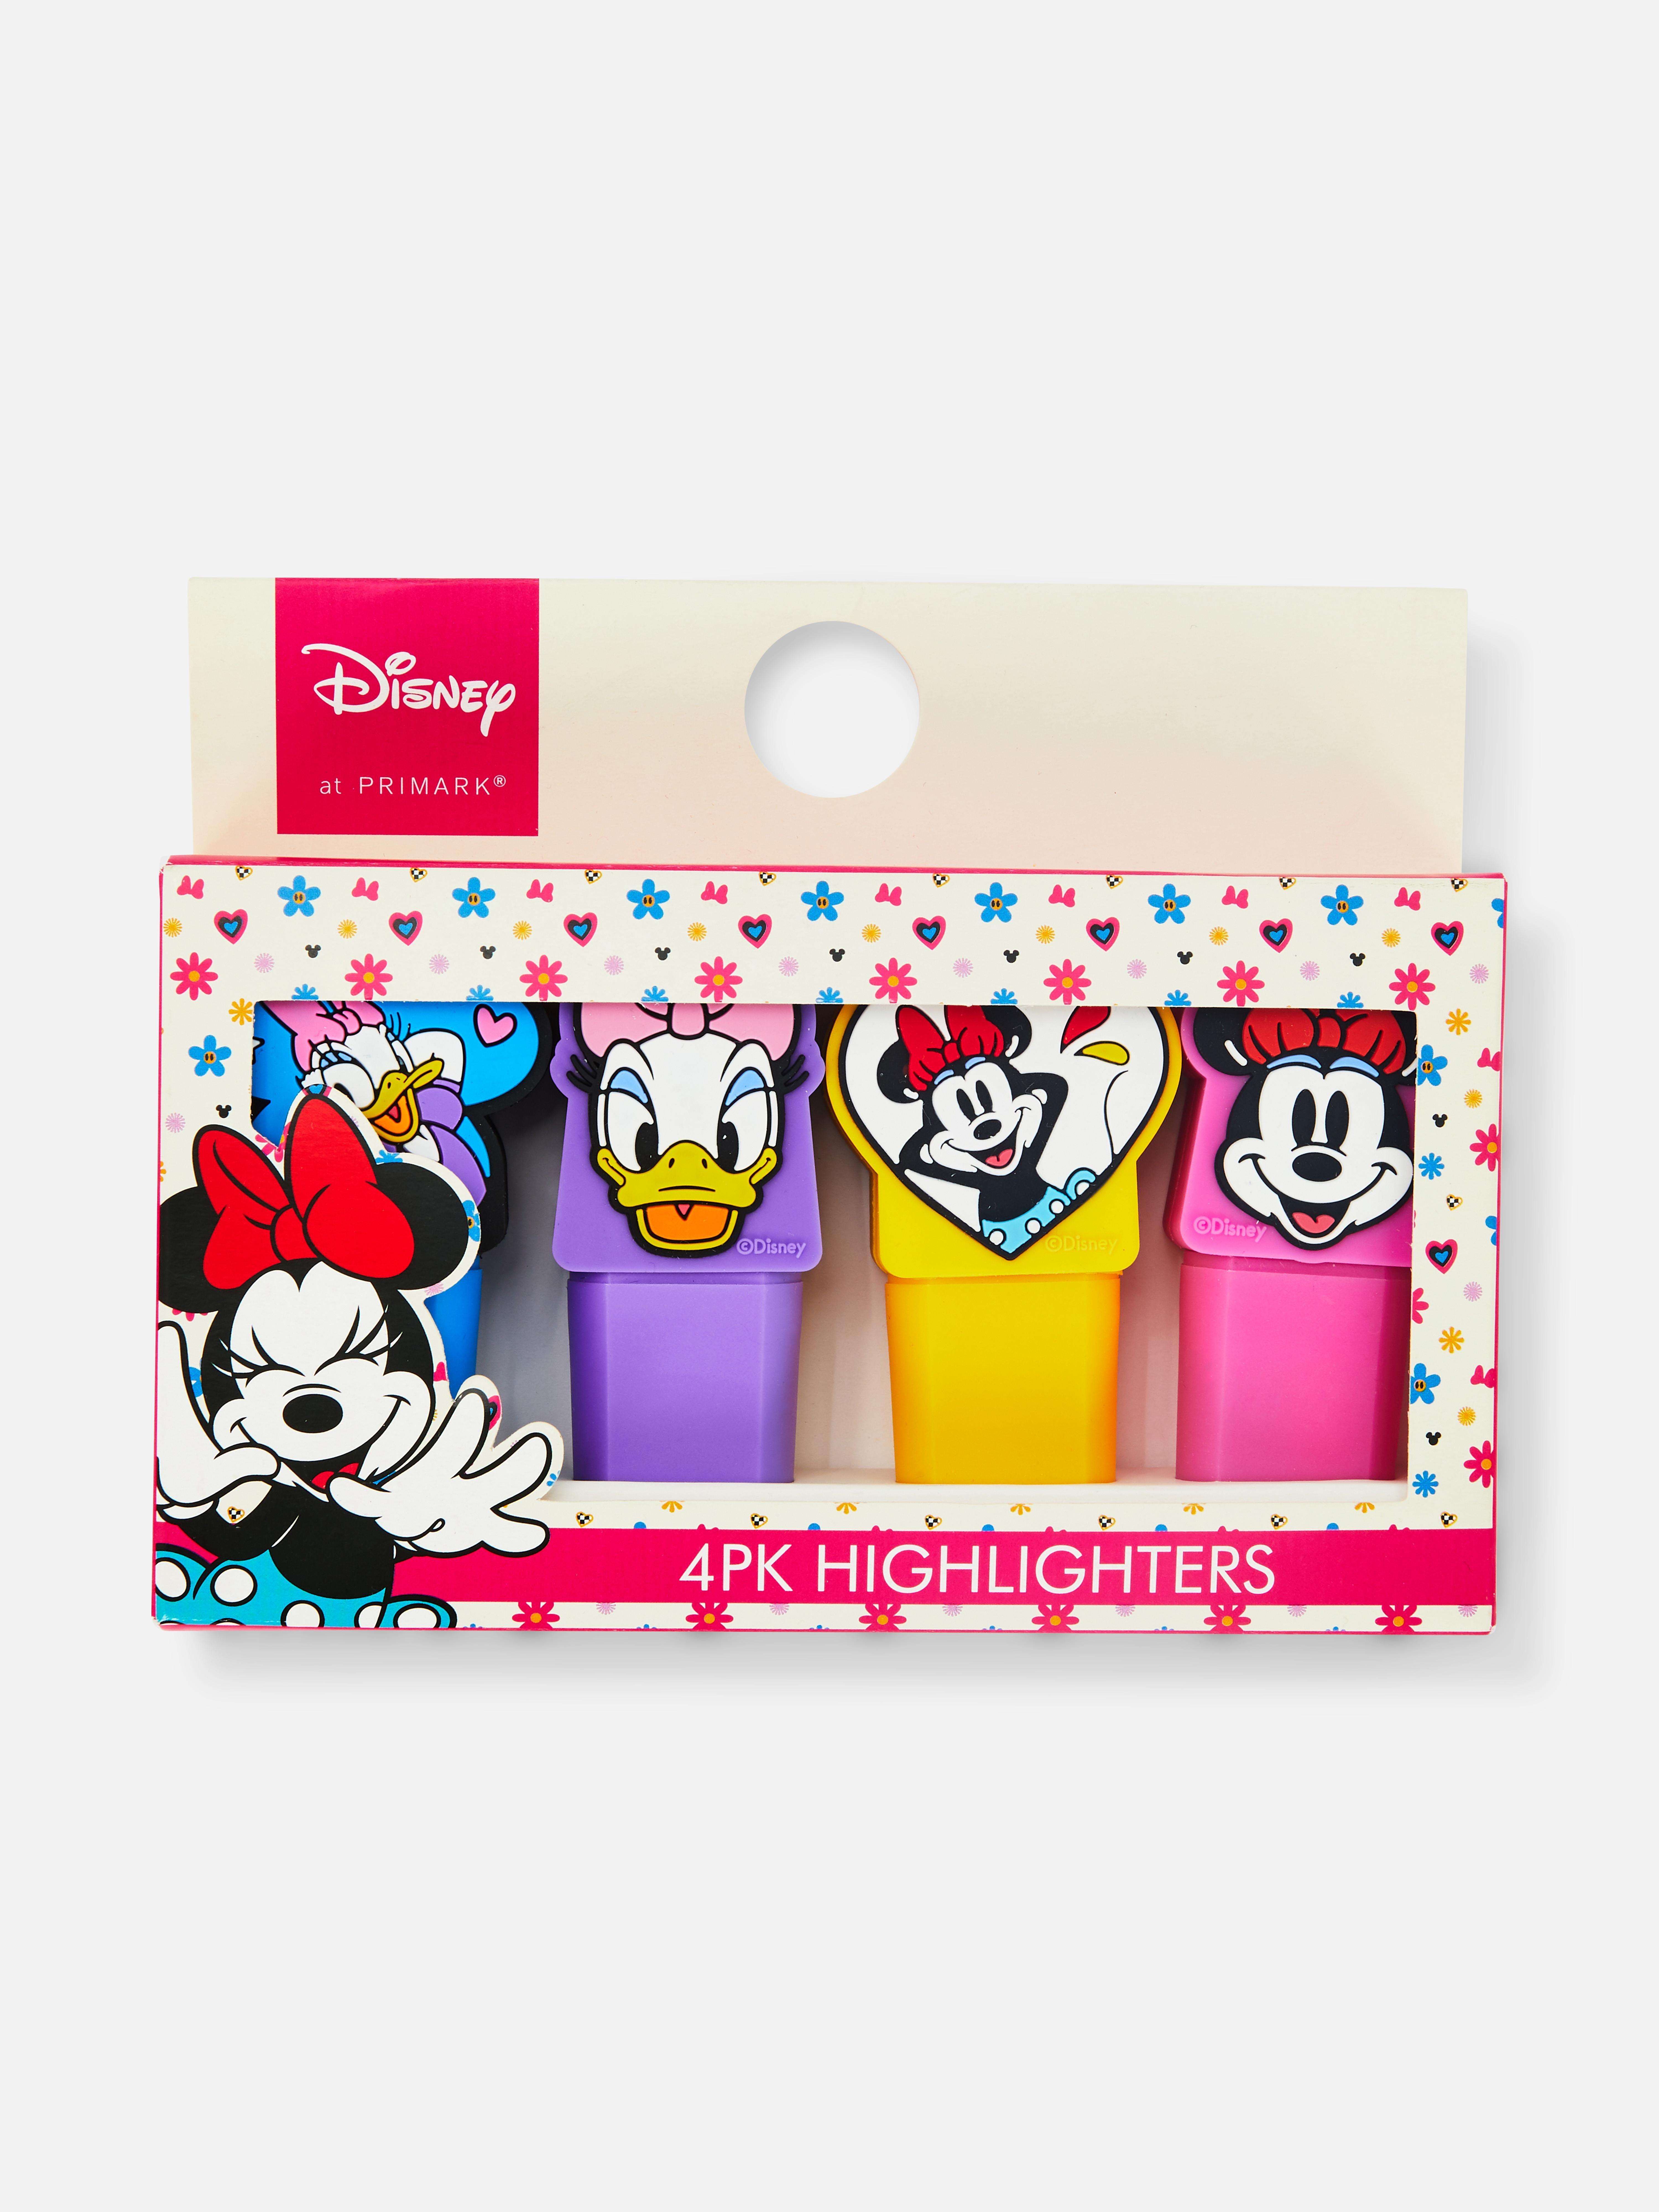 4pk Disney's Minnie Mouse & Friends Highlighters